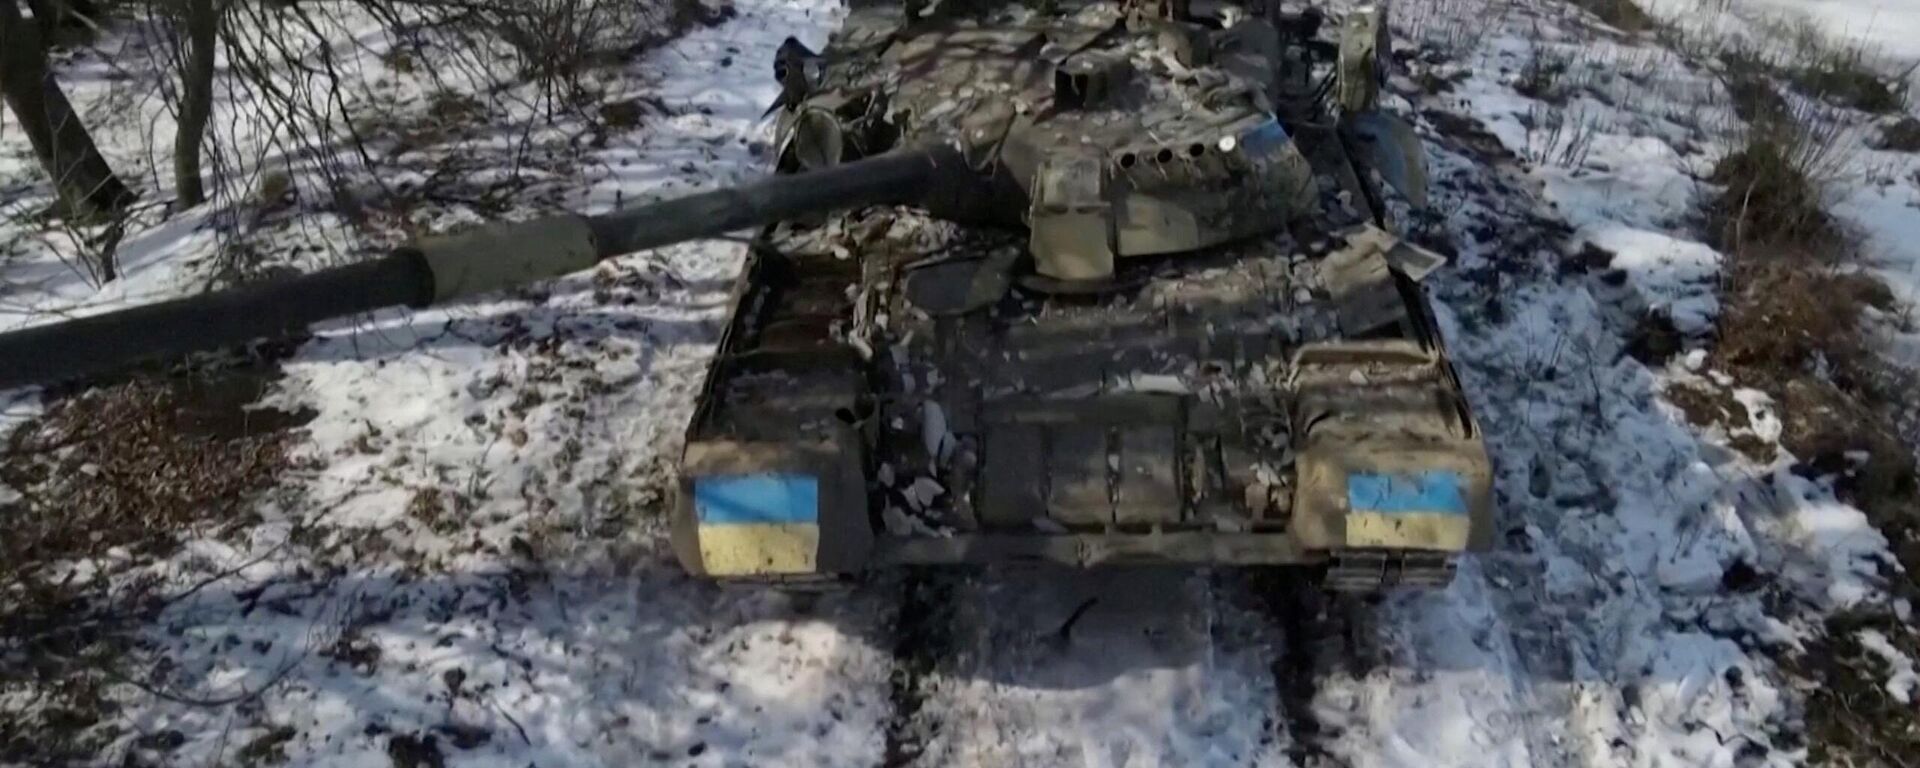 A view of a tank with the Ukrainian flag painted on it in Klymentove, Ukraine, in this still image taken from drone video released by the Ukrainian Armed Forces March 20, 2022. - Sputnik International, 1920, 02.04.2022